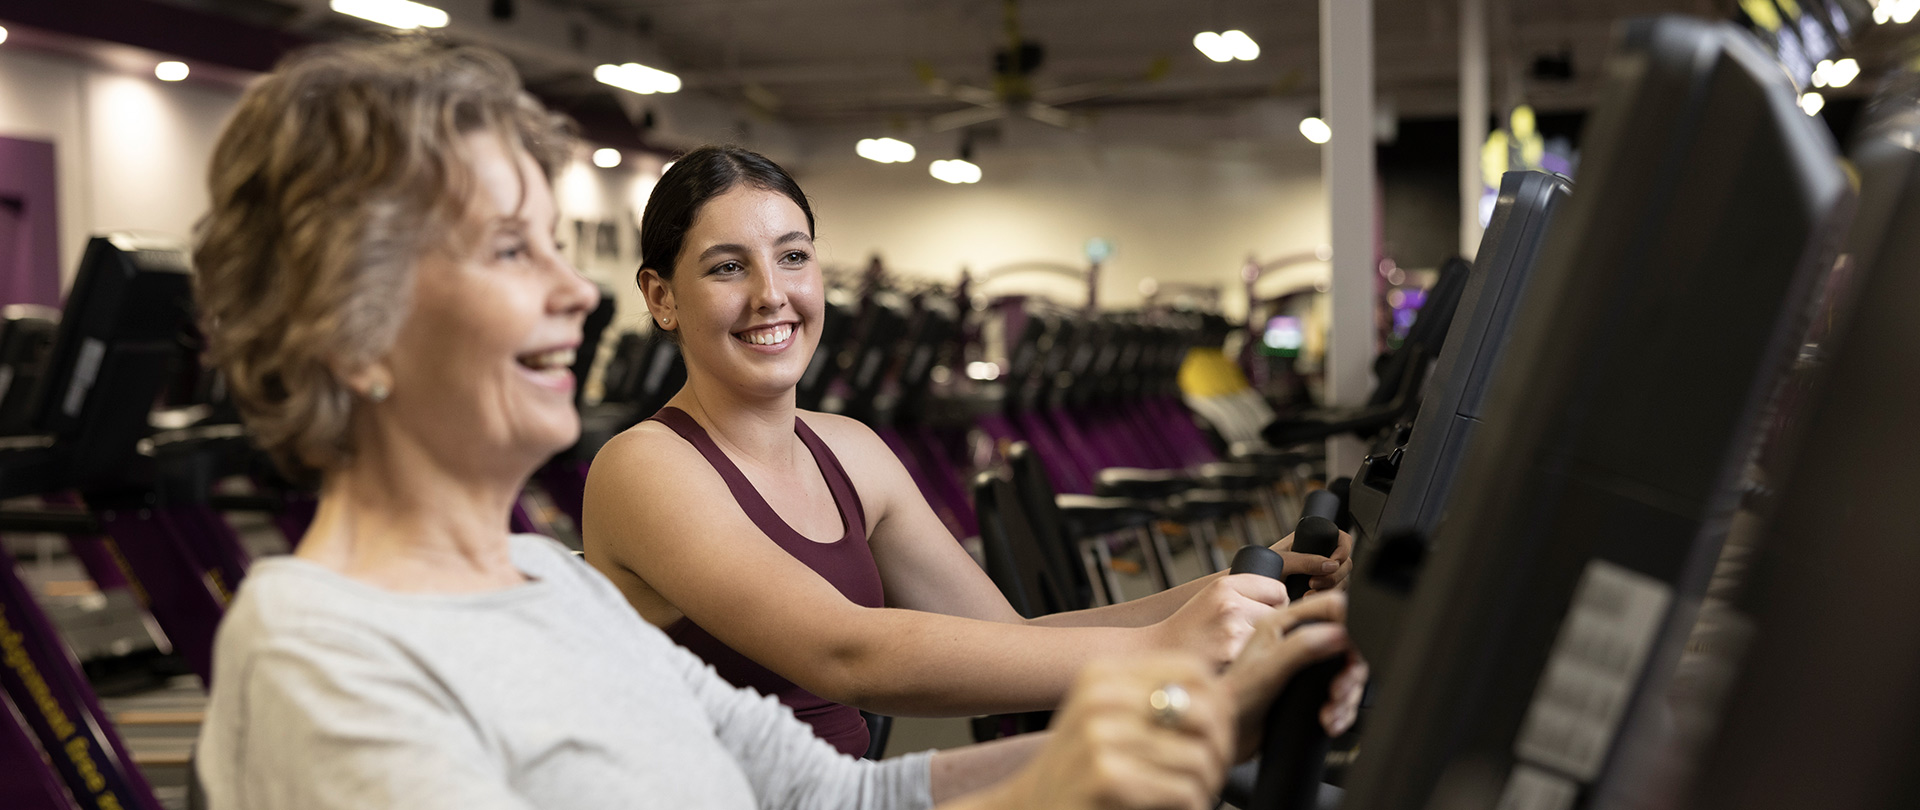 24/7 Gym in Chermside QLD  Planet Fitness Chermside - Planet